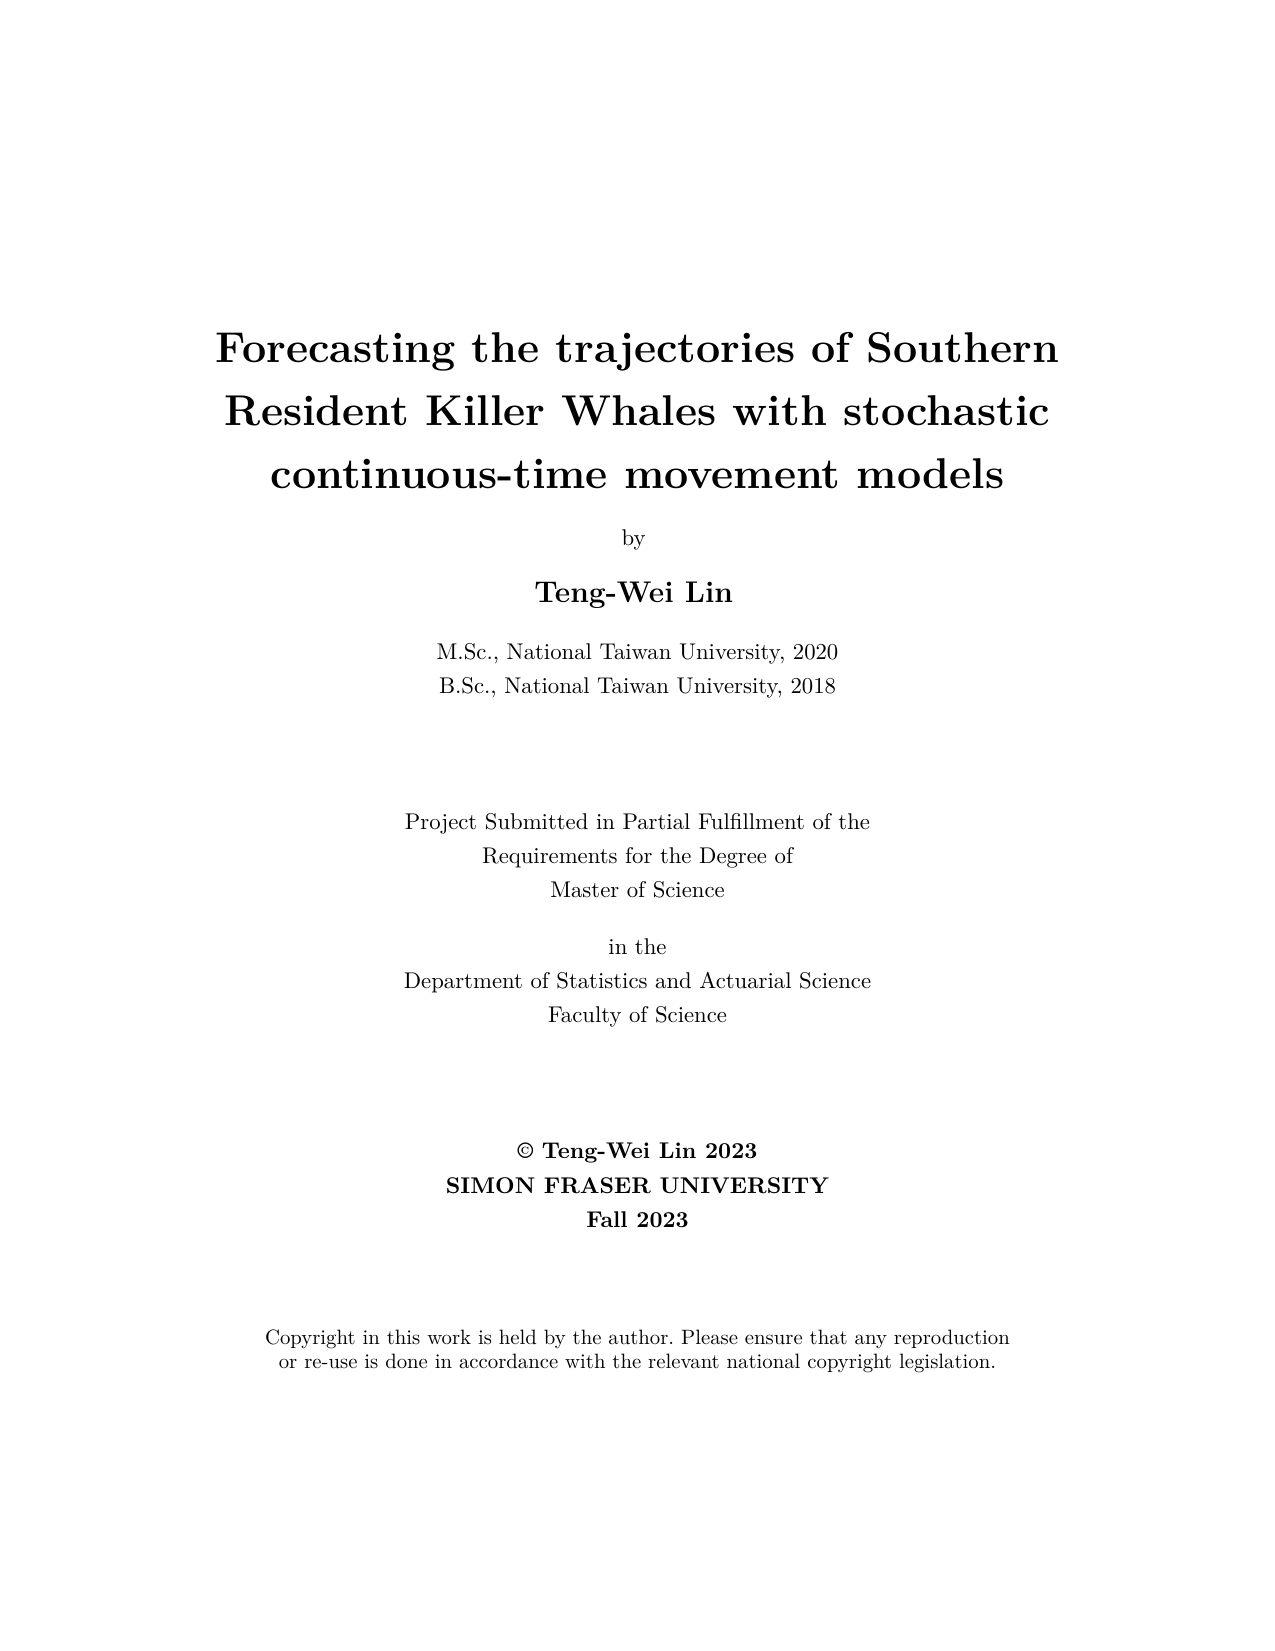 Read more about Forecasting the trajectories of Southern Resident Killer Whales with stochastic continuous-time movement models